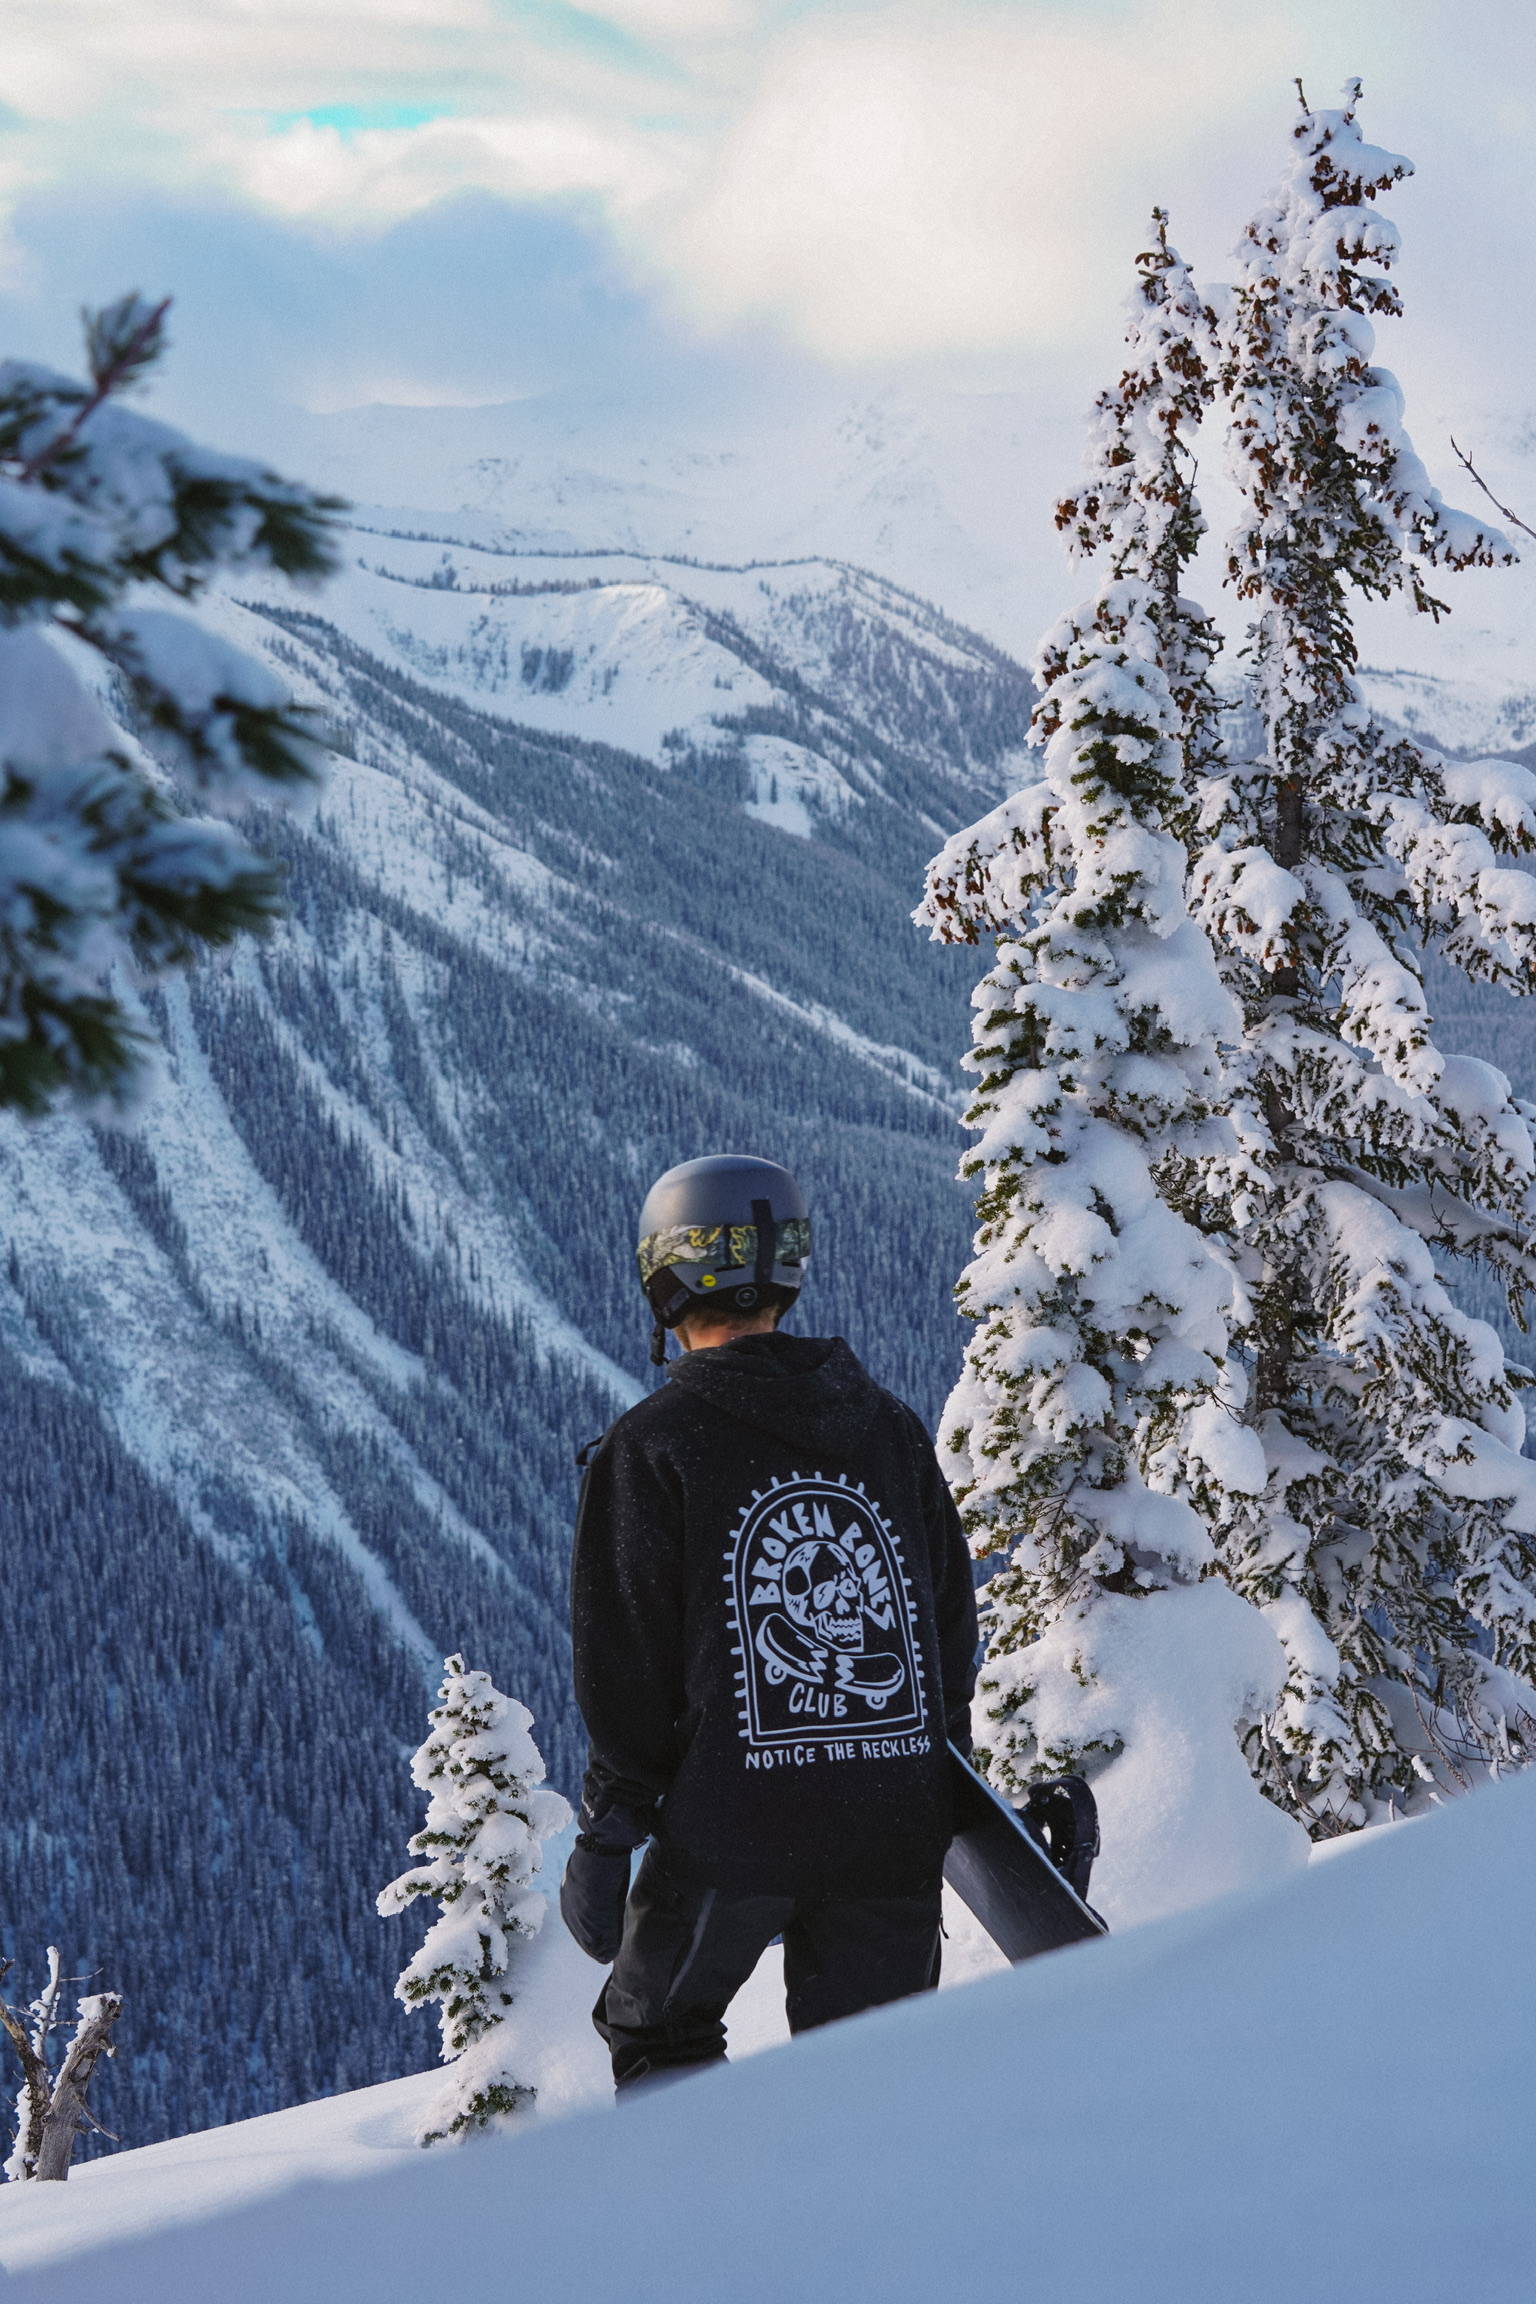 A man snowboarder with a broken bones club hoodie in the snowy mountains